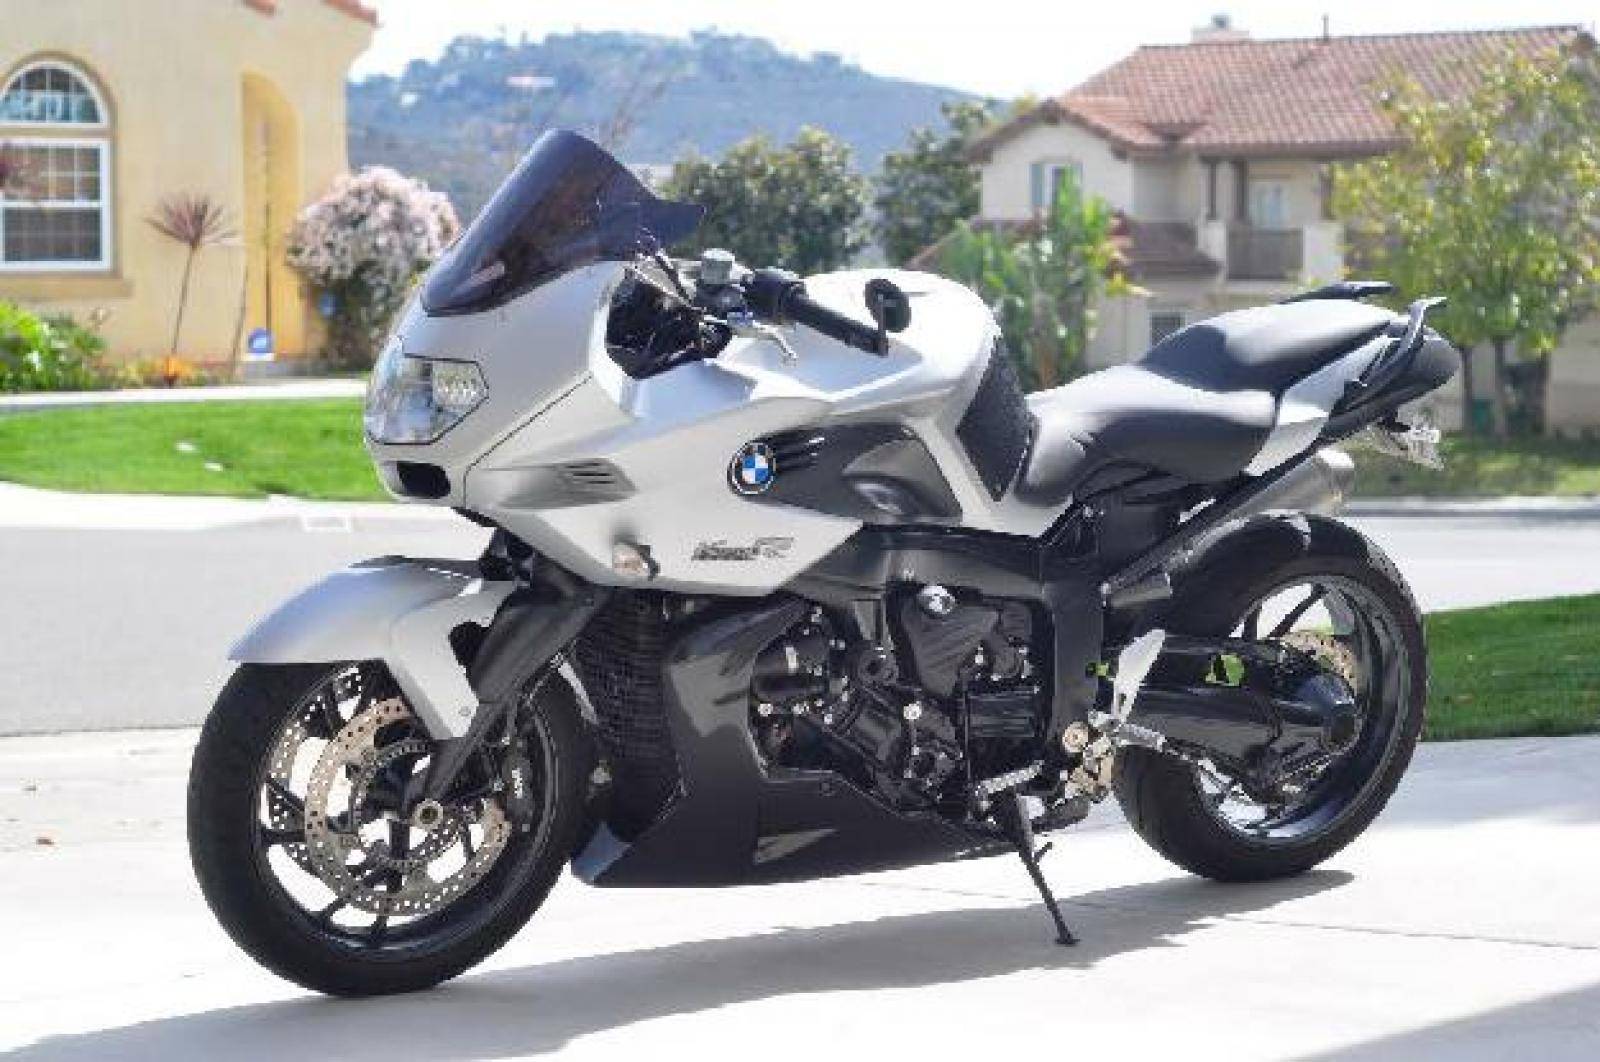 Bmw k 1200 r 2007 | about motorcycles